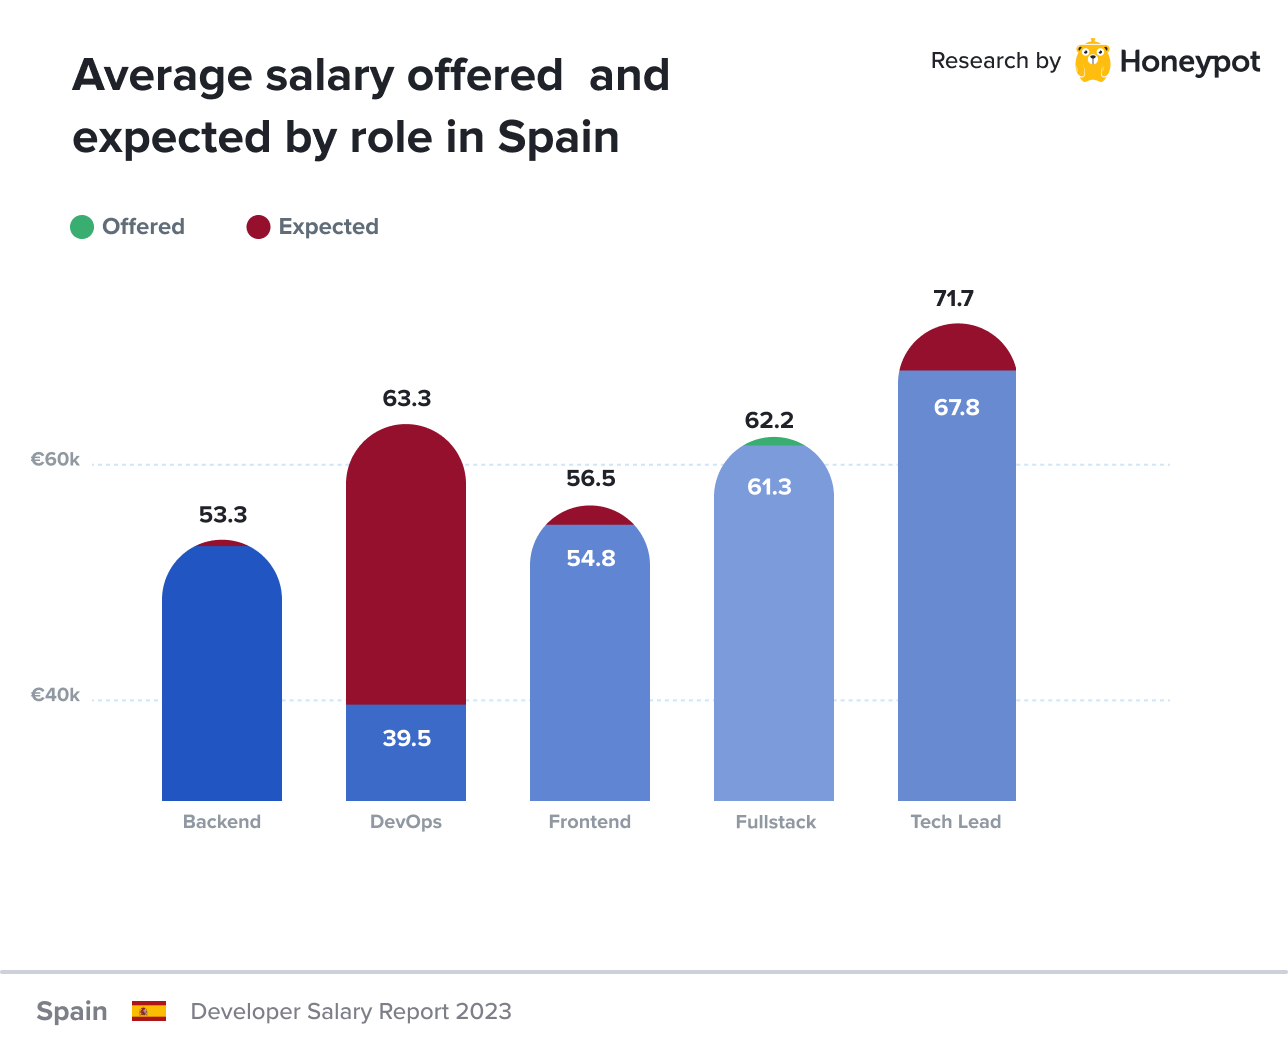 Spain – Average offered and expected salary by role in Spain